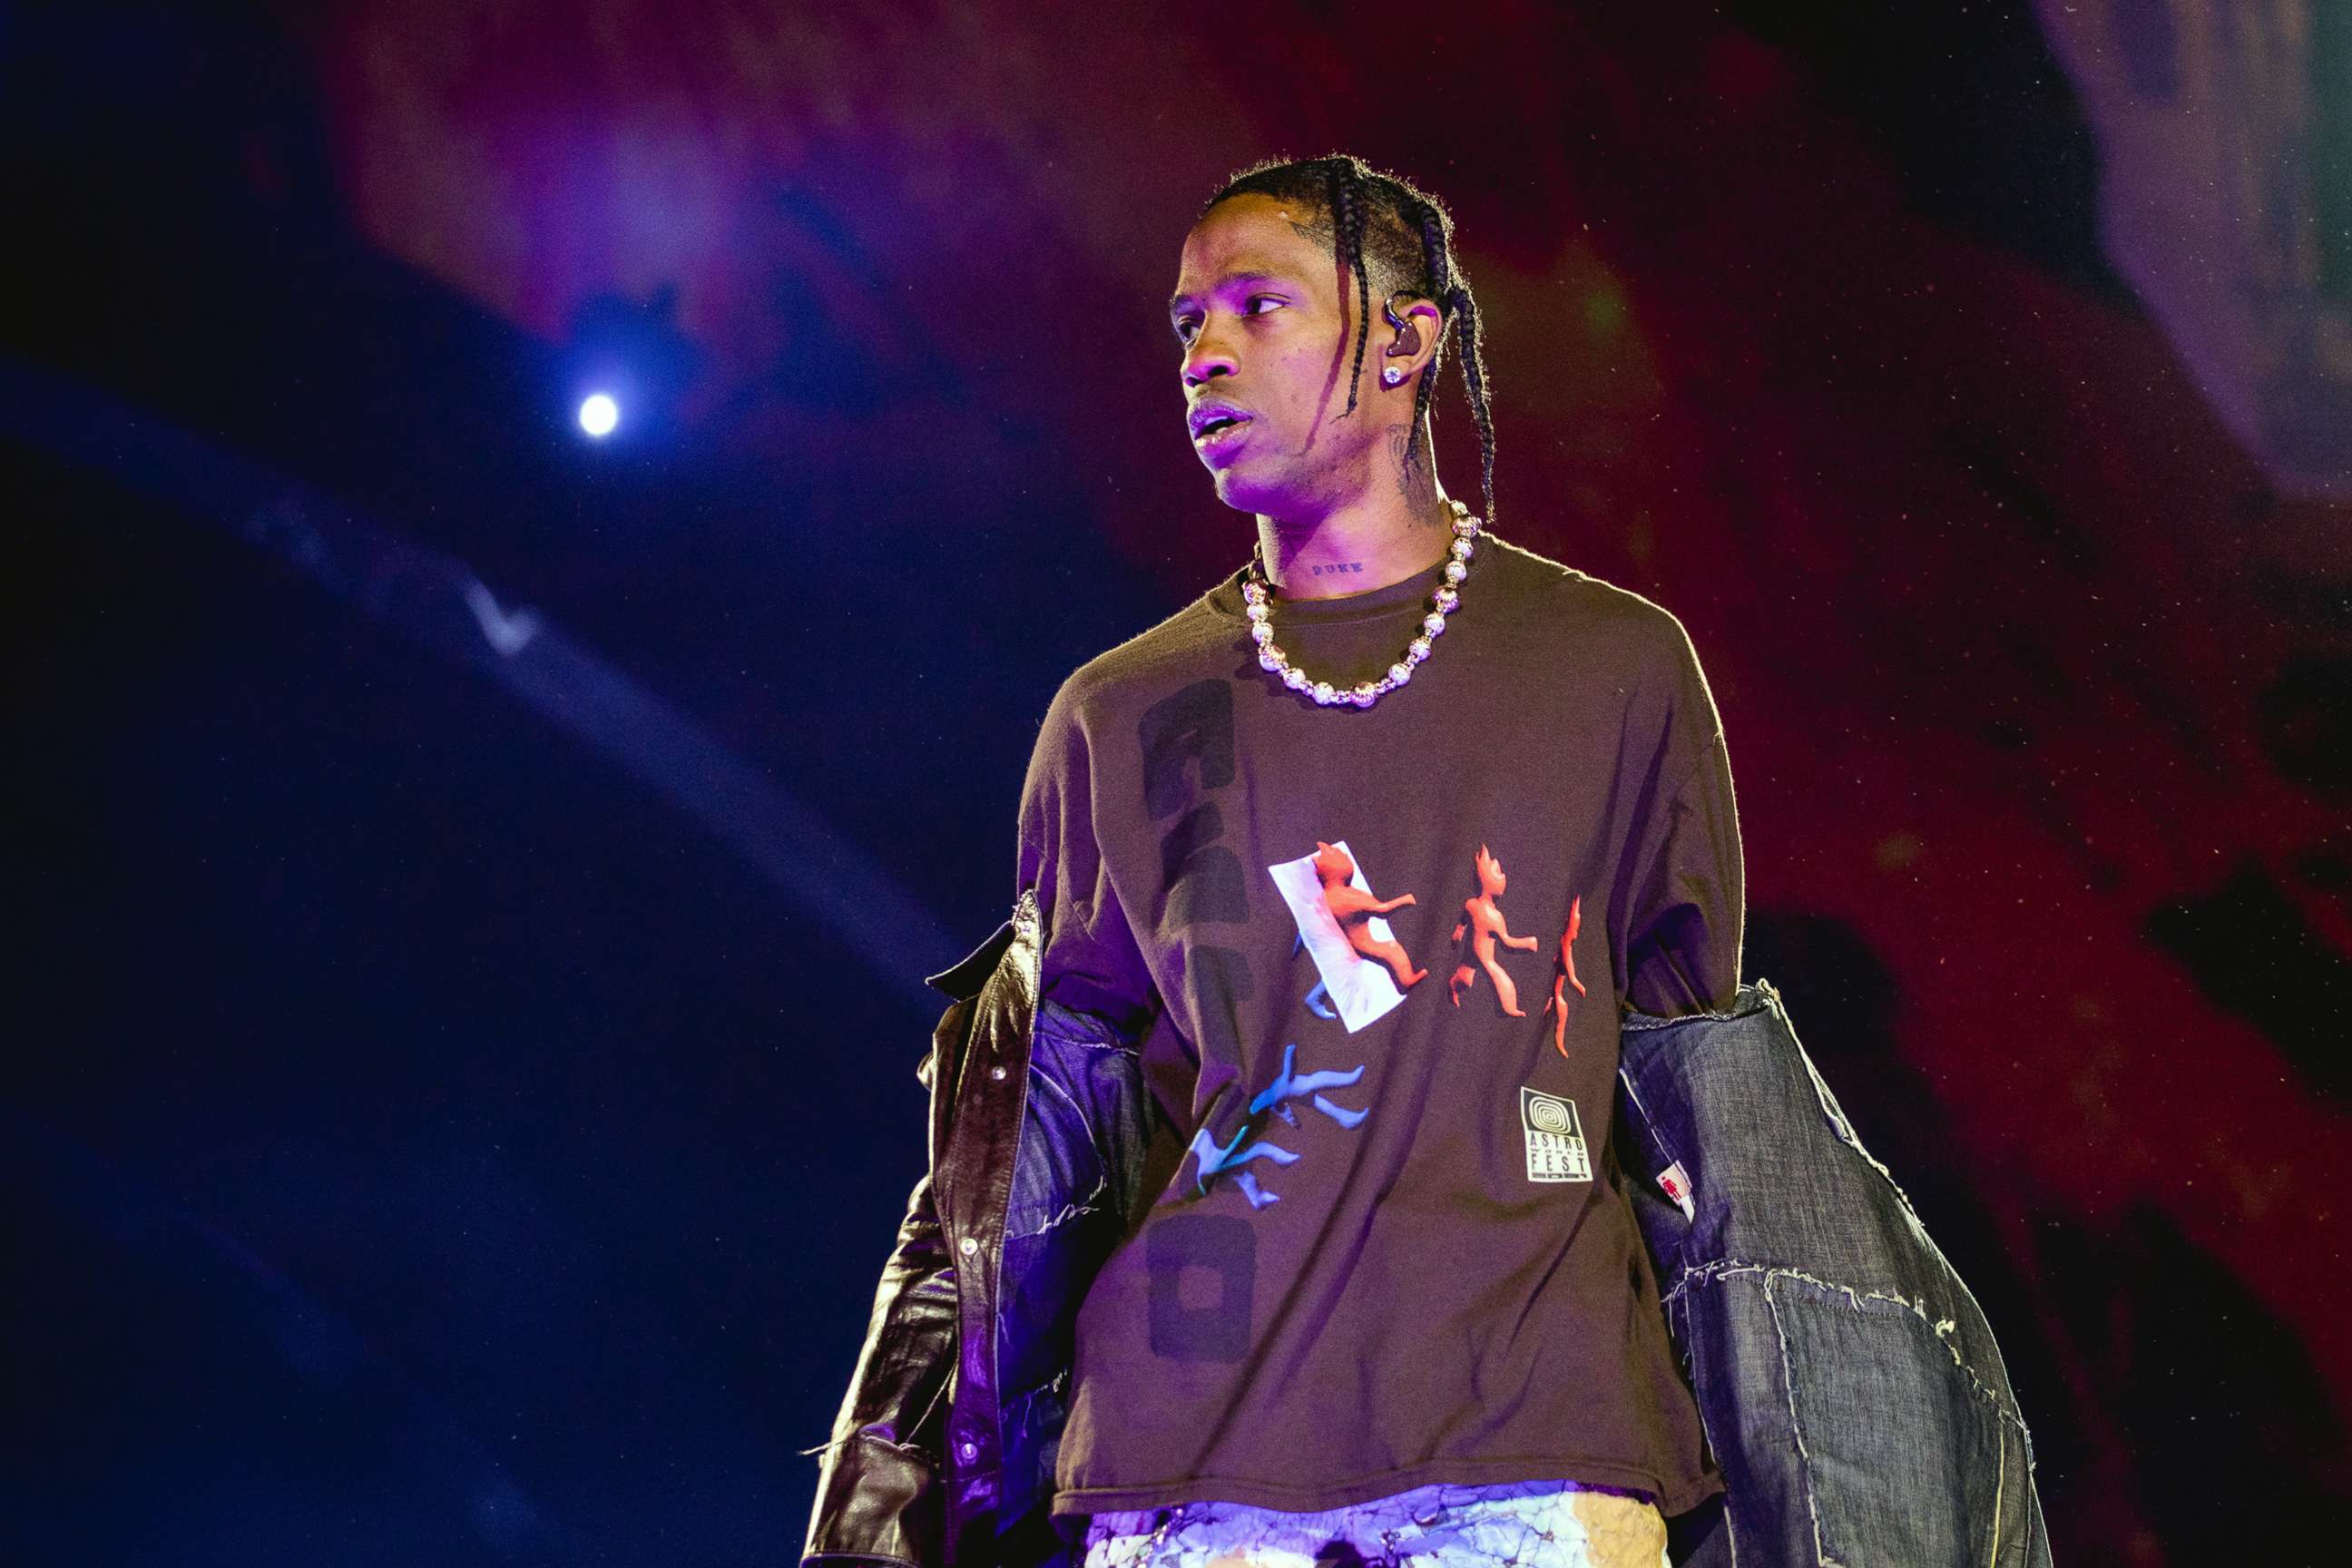 Man claims rapper Travis Scott punched him at nightclub: Police - ABC News